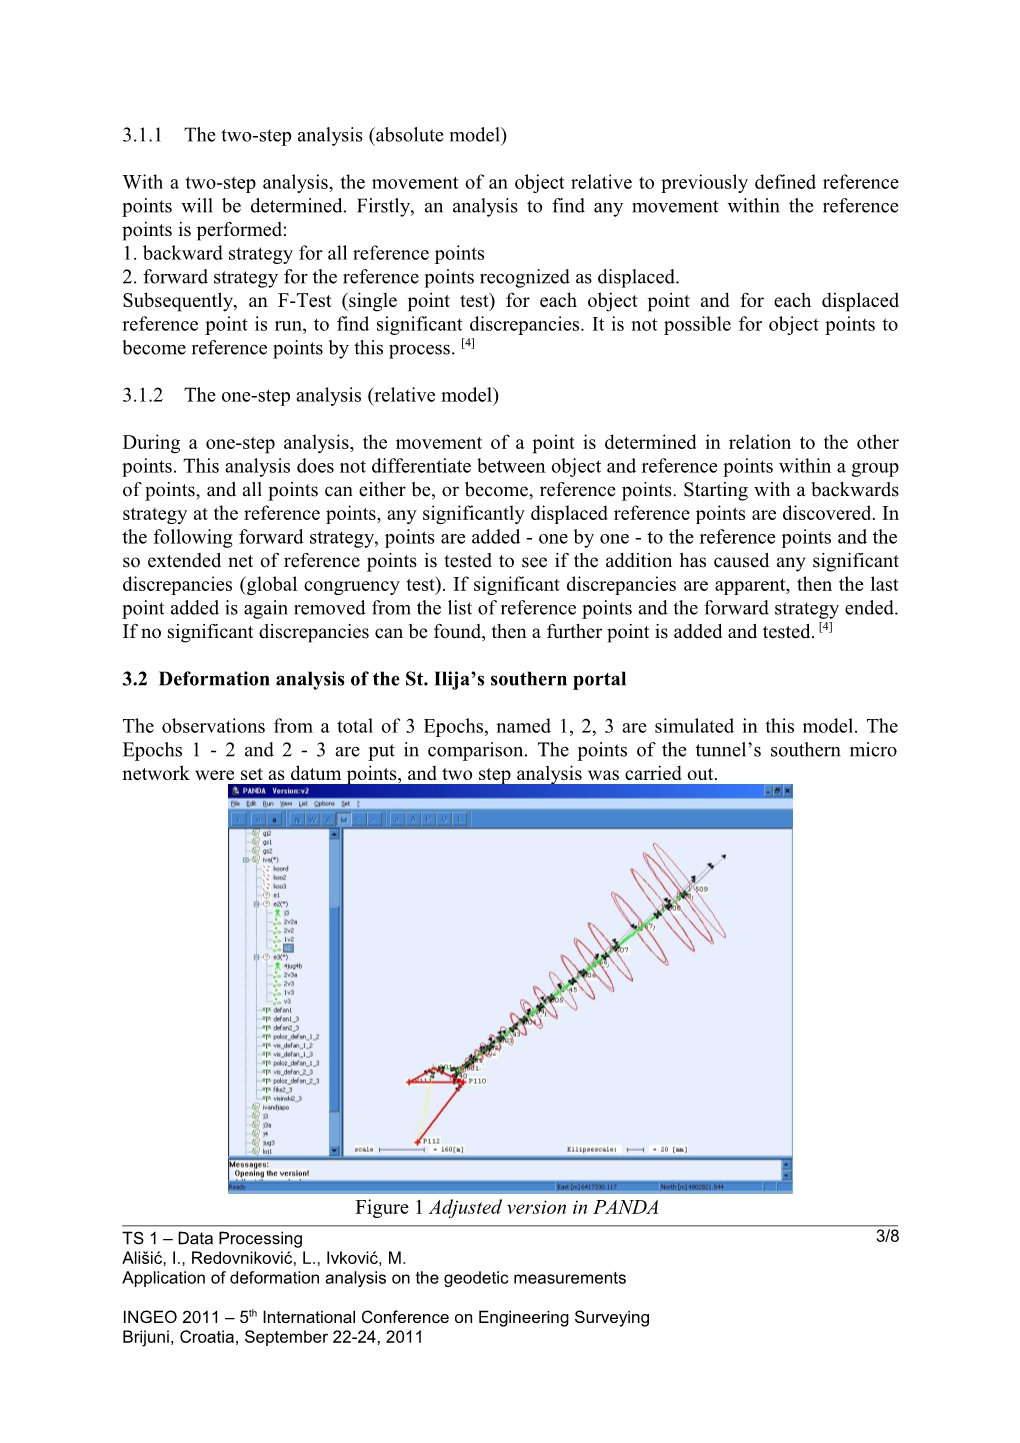 Application of Deformation Analysis on the Geodetic Measurement